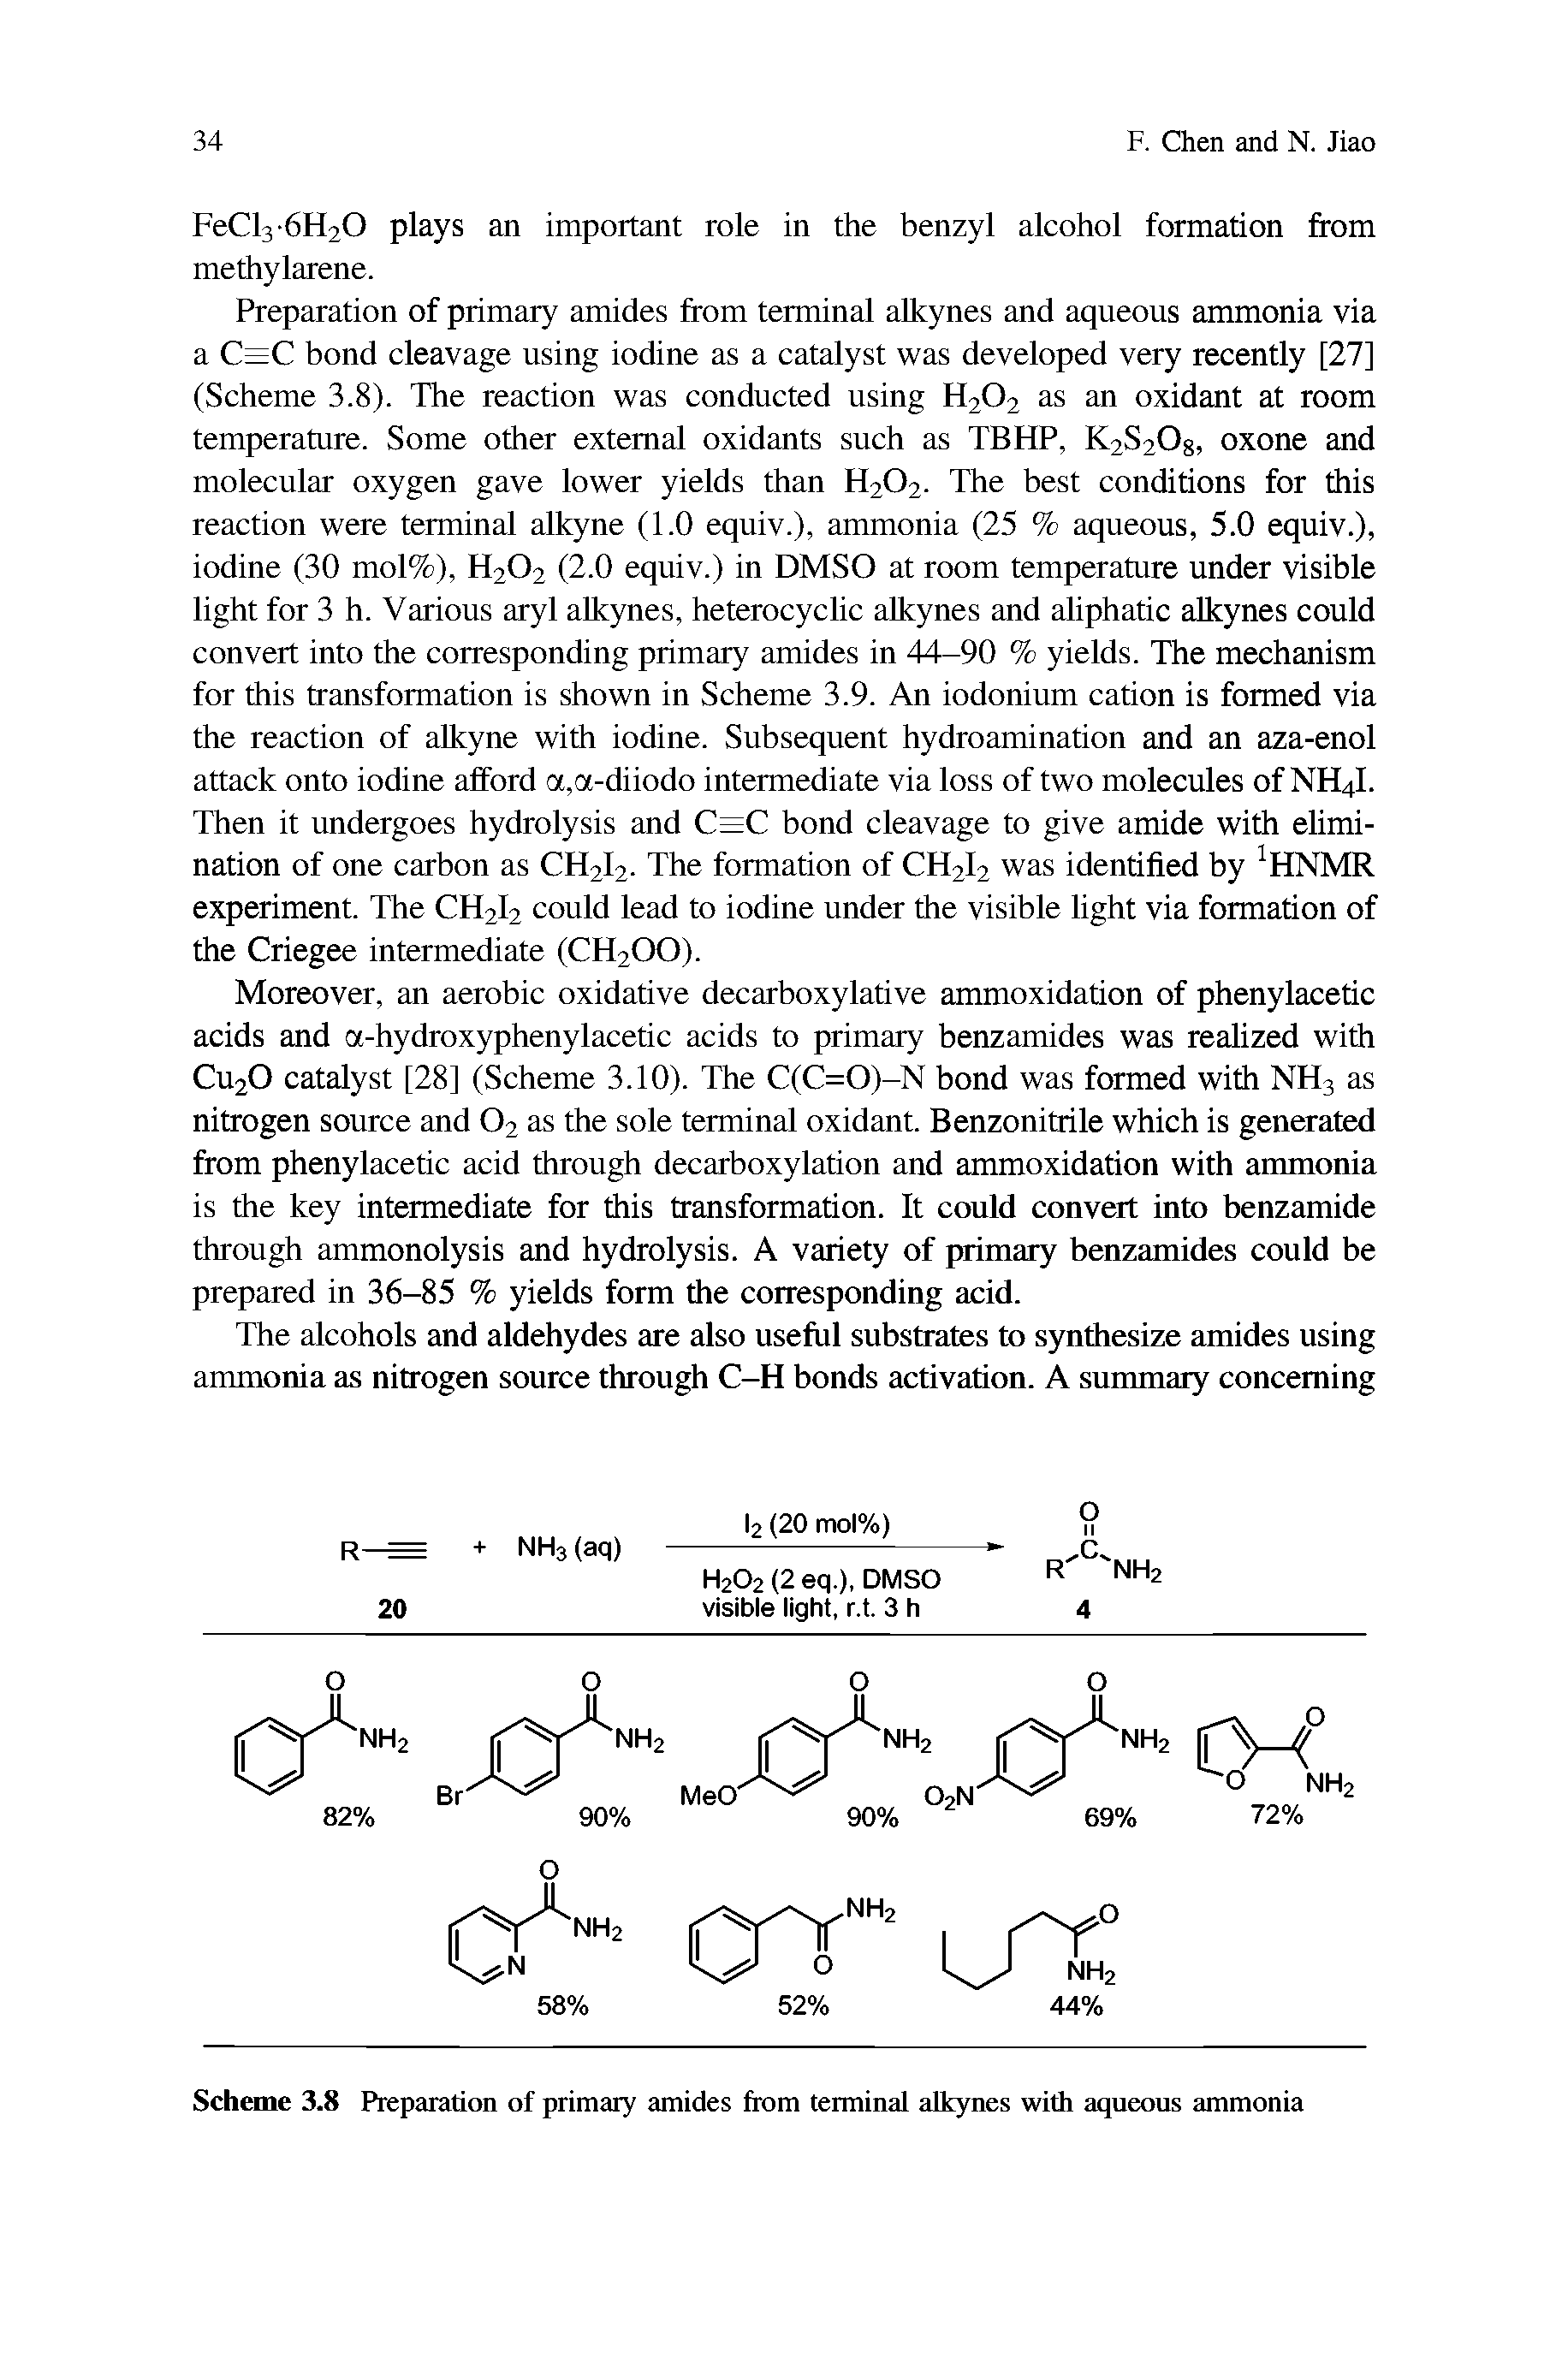 Scheme 3.8 Preparation of primary amides from terminal alkynes with aqueous ammonia...